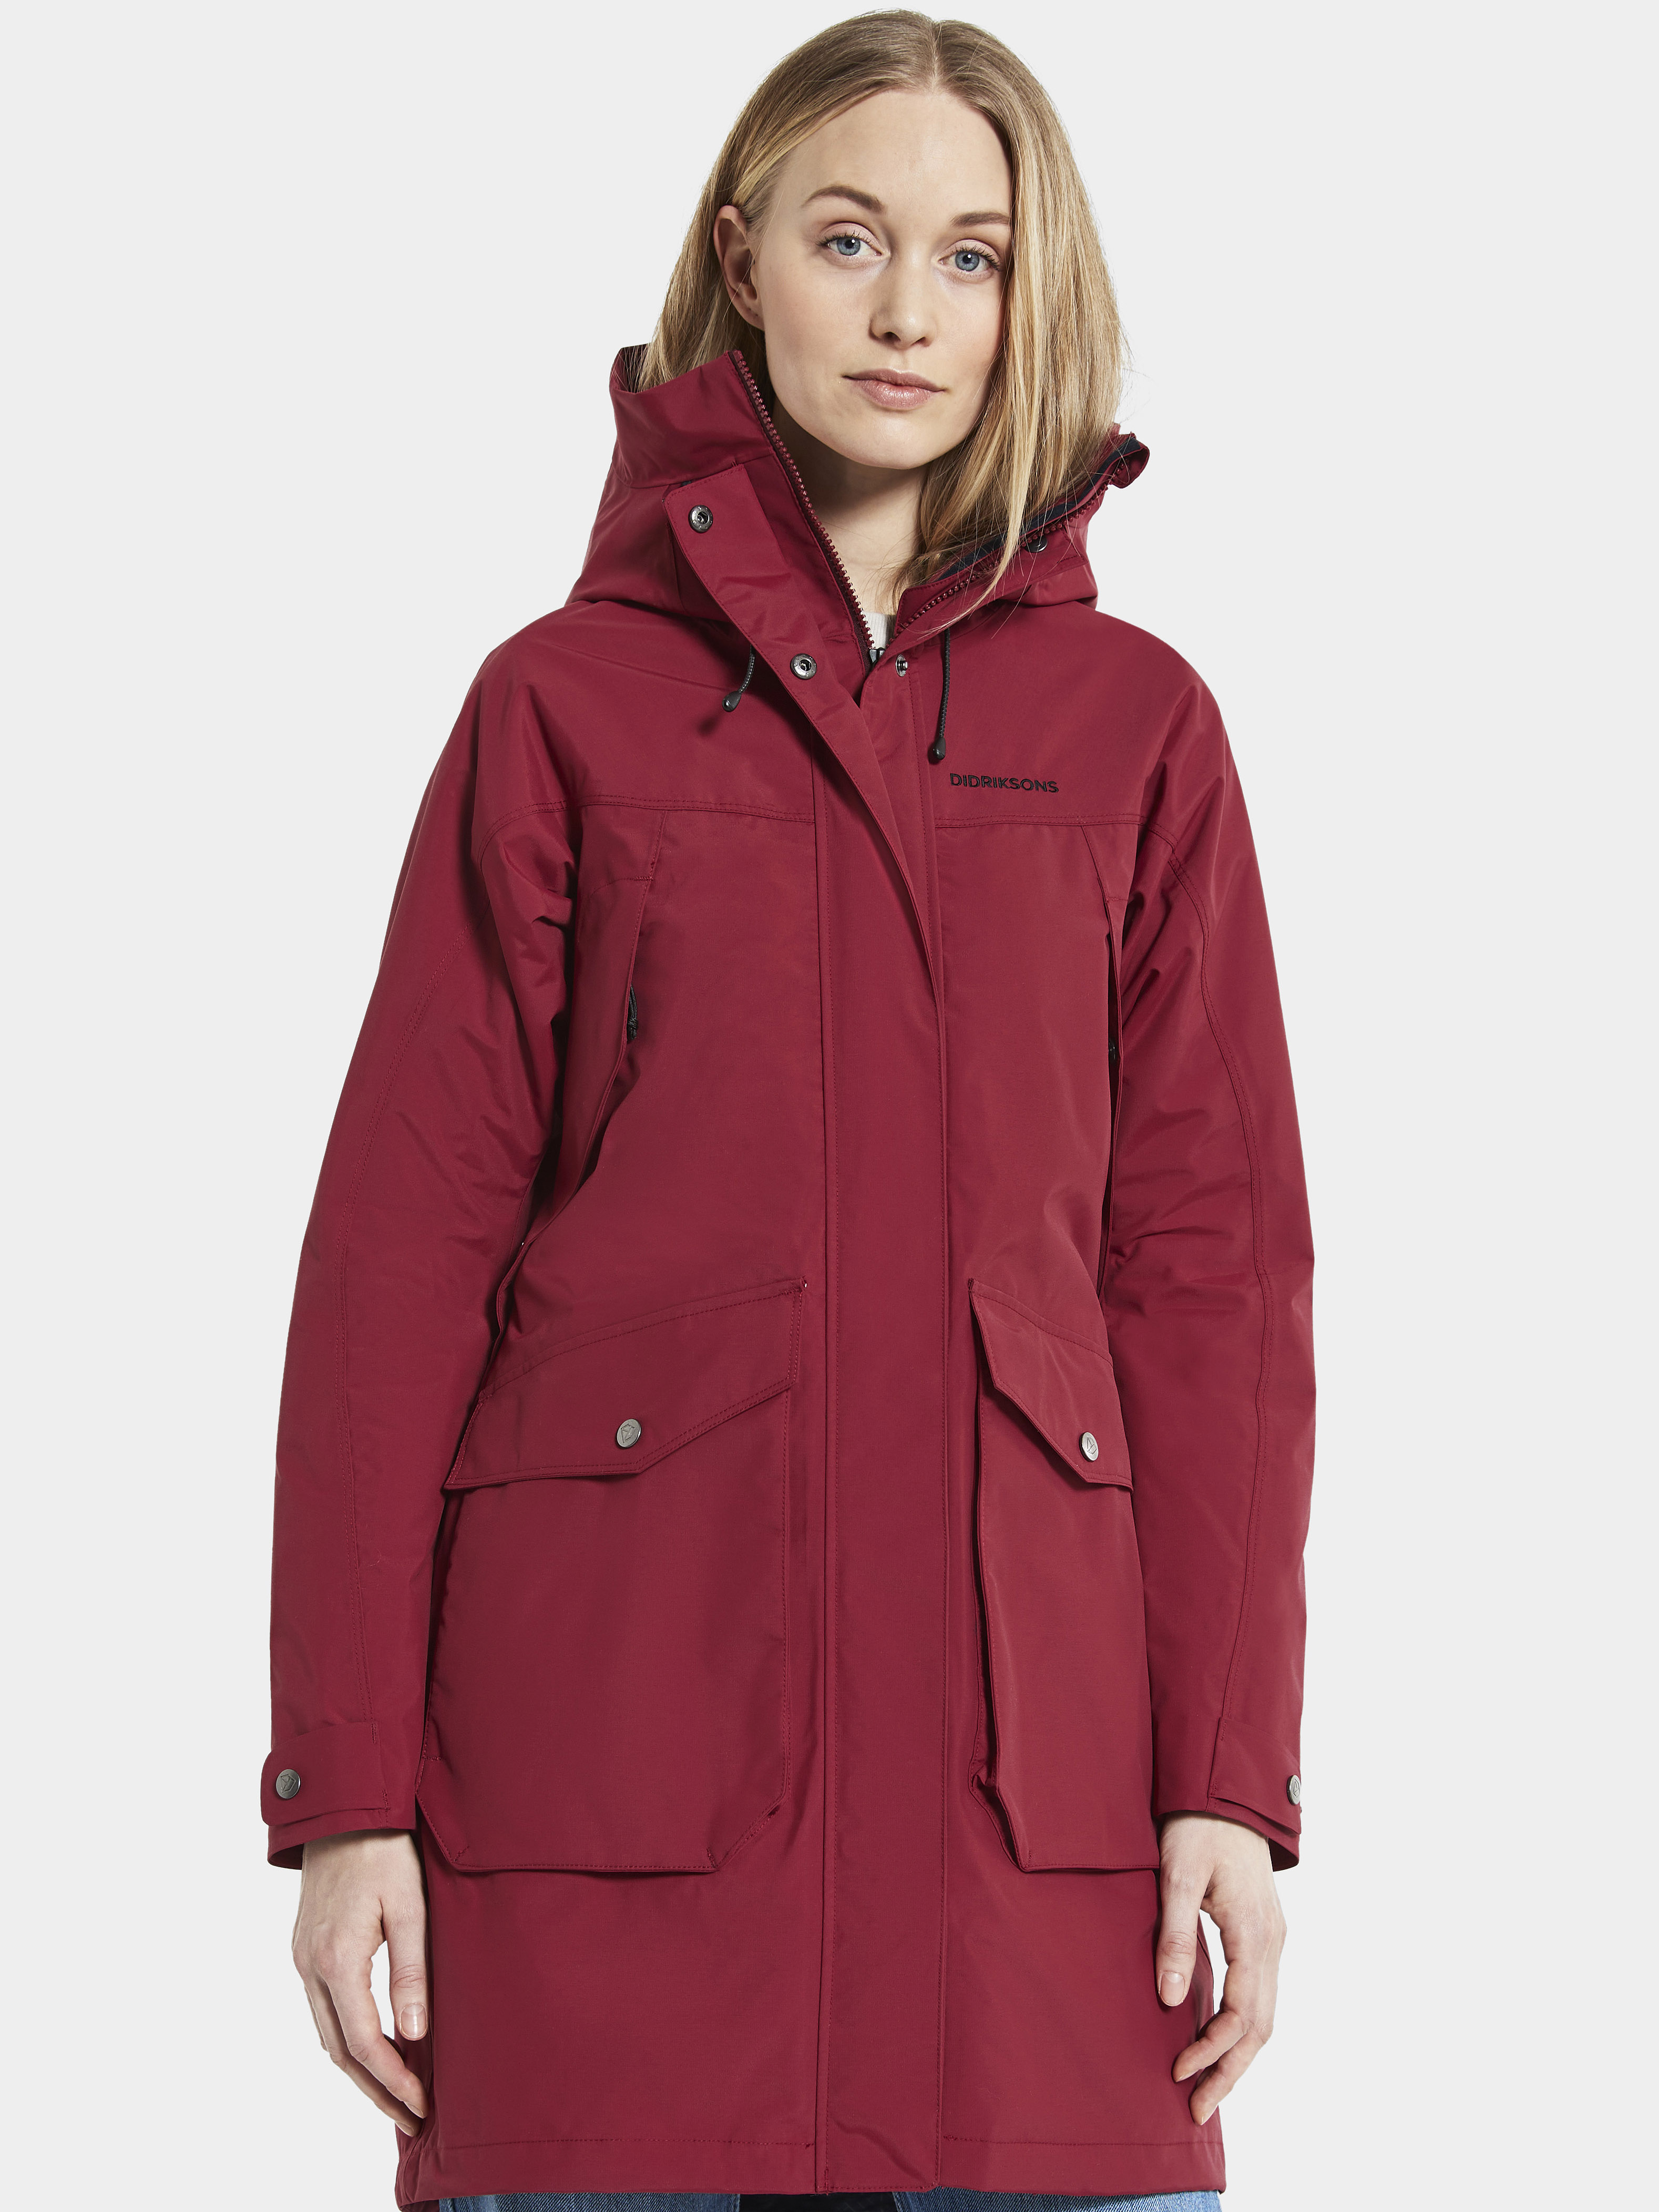 Thelma Women's Parka 8 Ruby Red | Buy Thelma Women's Parka 8 Ruby Red here  | Outnorth